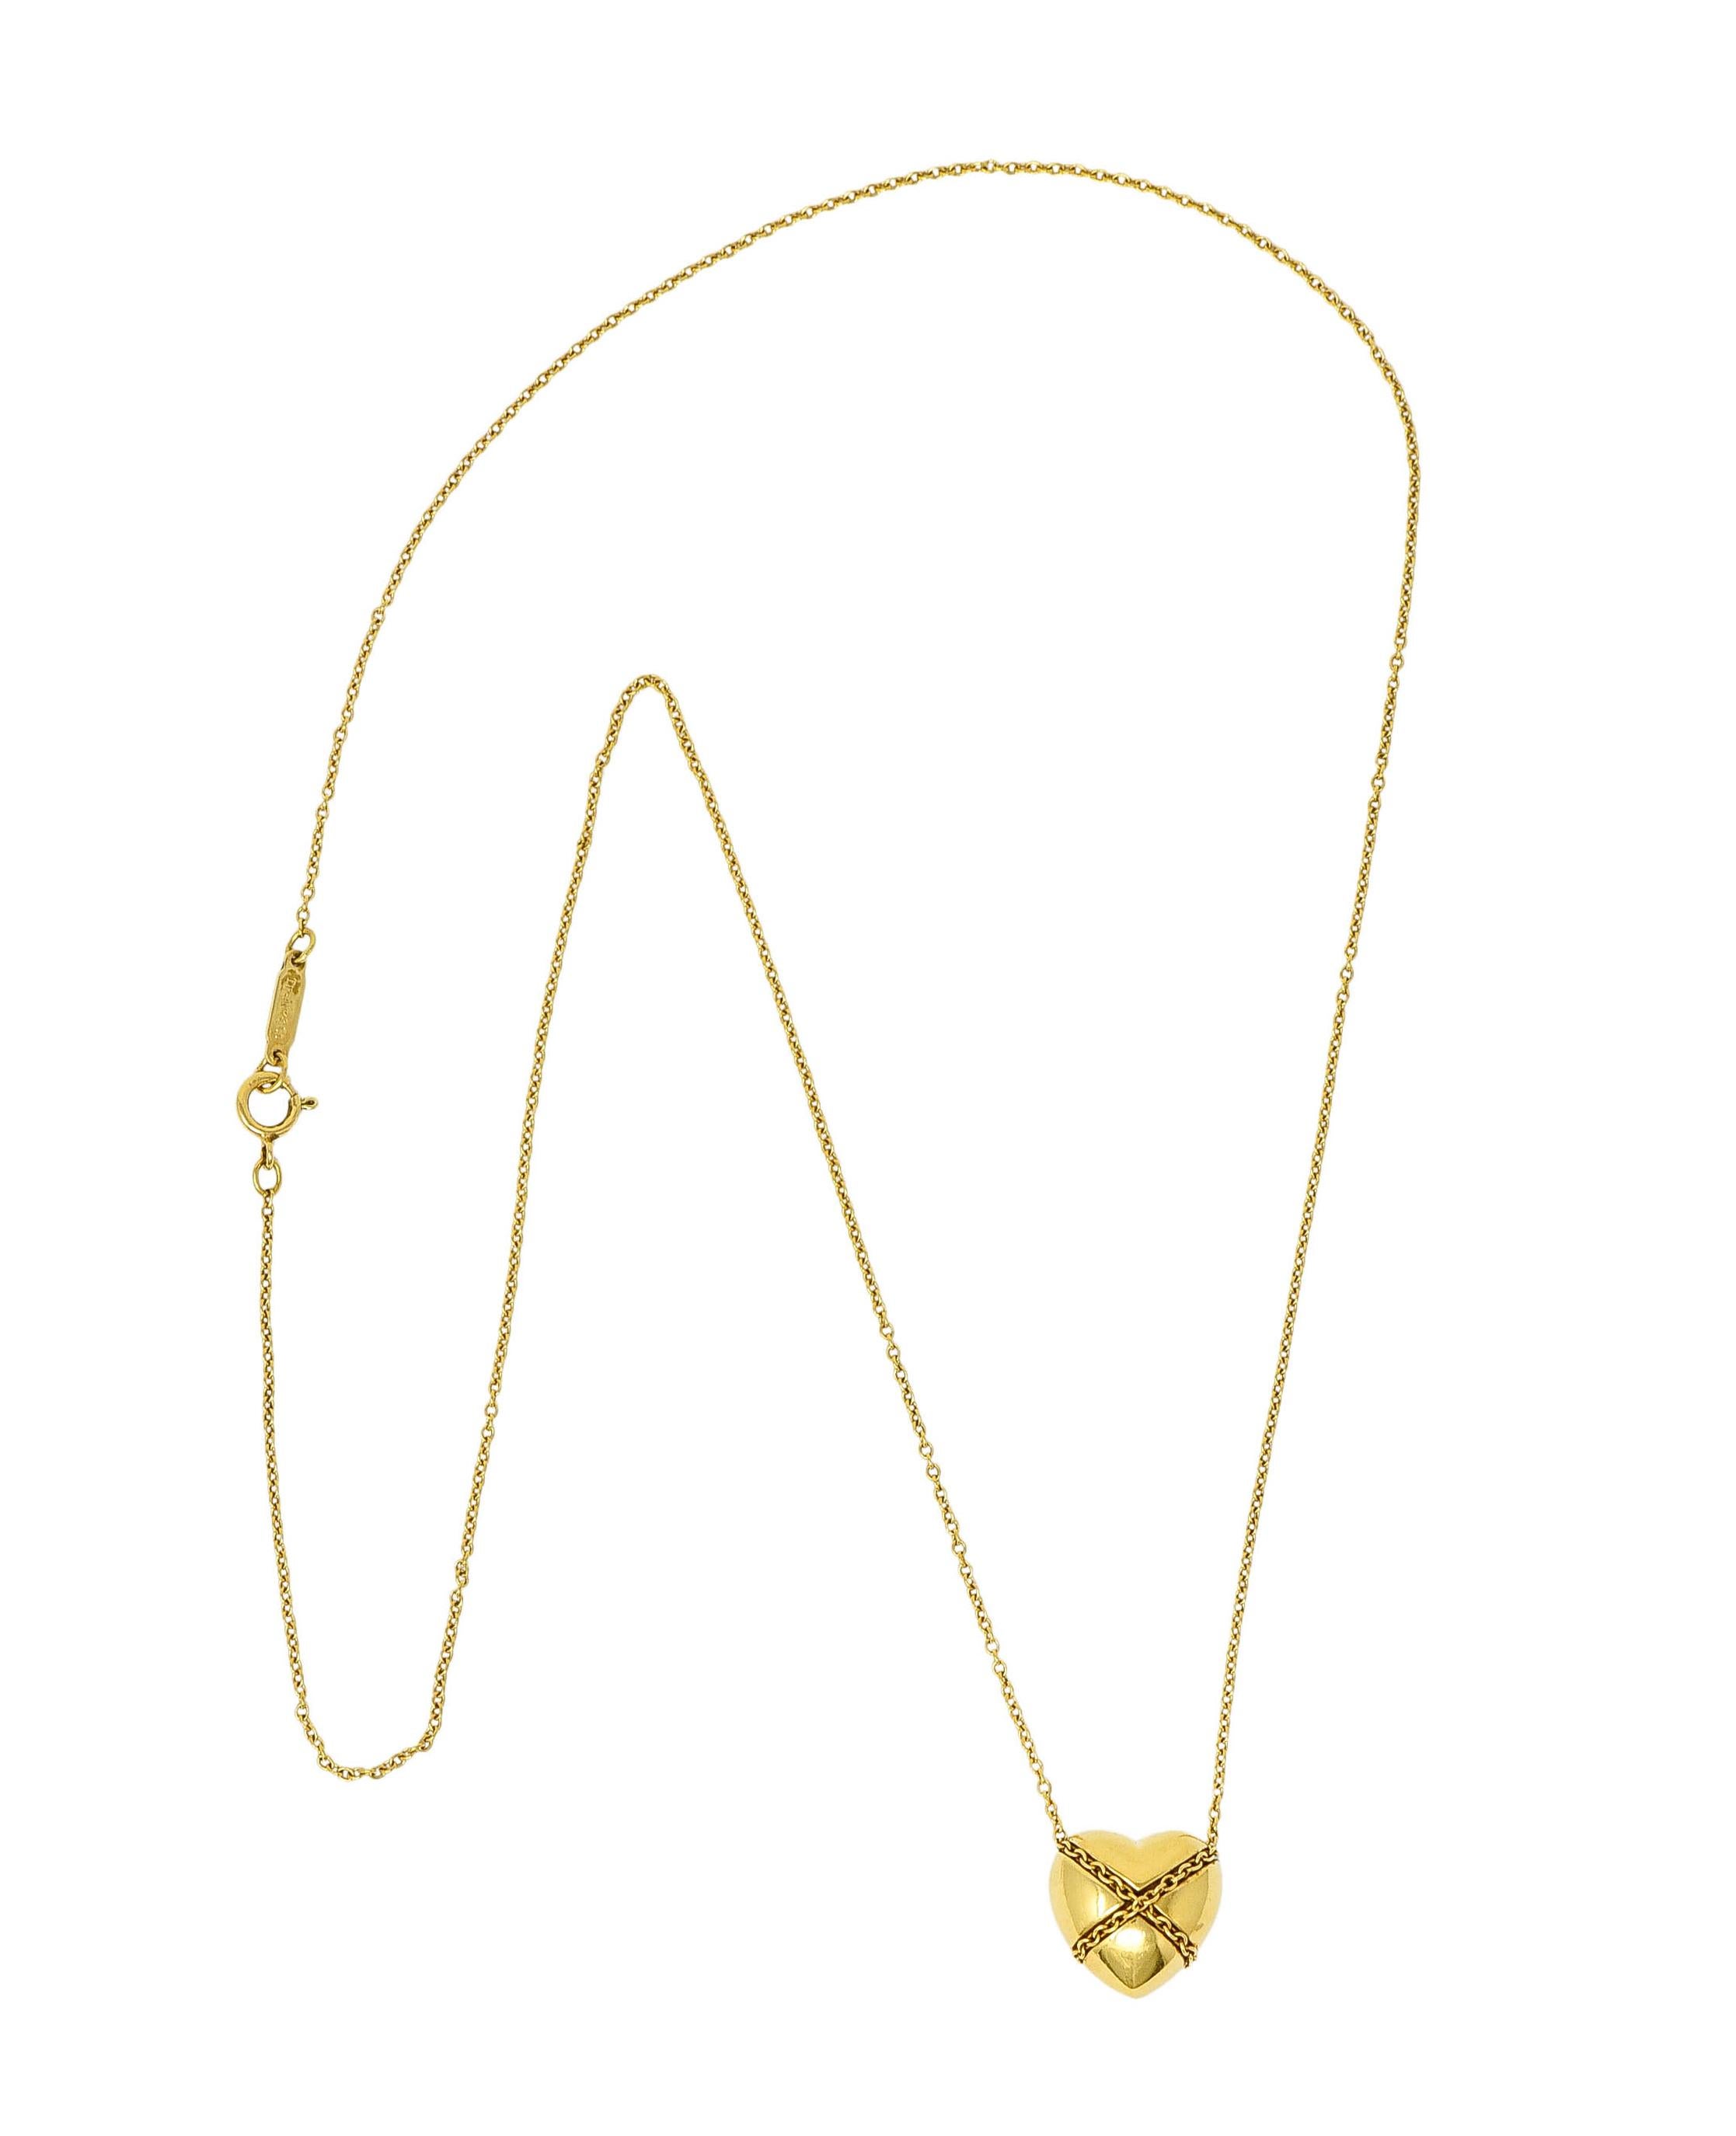 Cable chain necklace suspends a brightly polished puffed heart pendant

Encompassed with a twisted rope motif in a harlequin pattern

Completed by a spring ring clasp

Both stamped 750 for 18 karat gold

Both fully signed Tiffany & Co.

From the